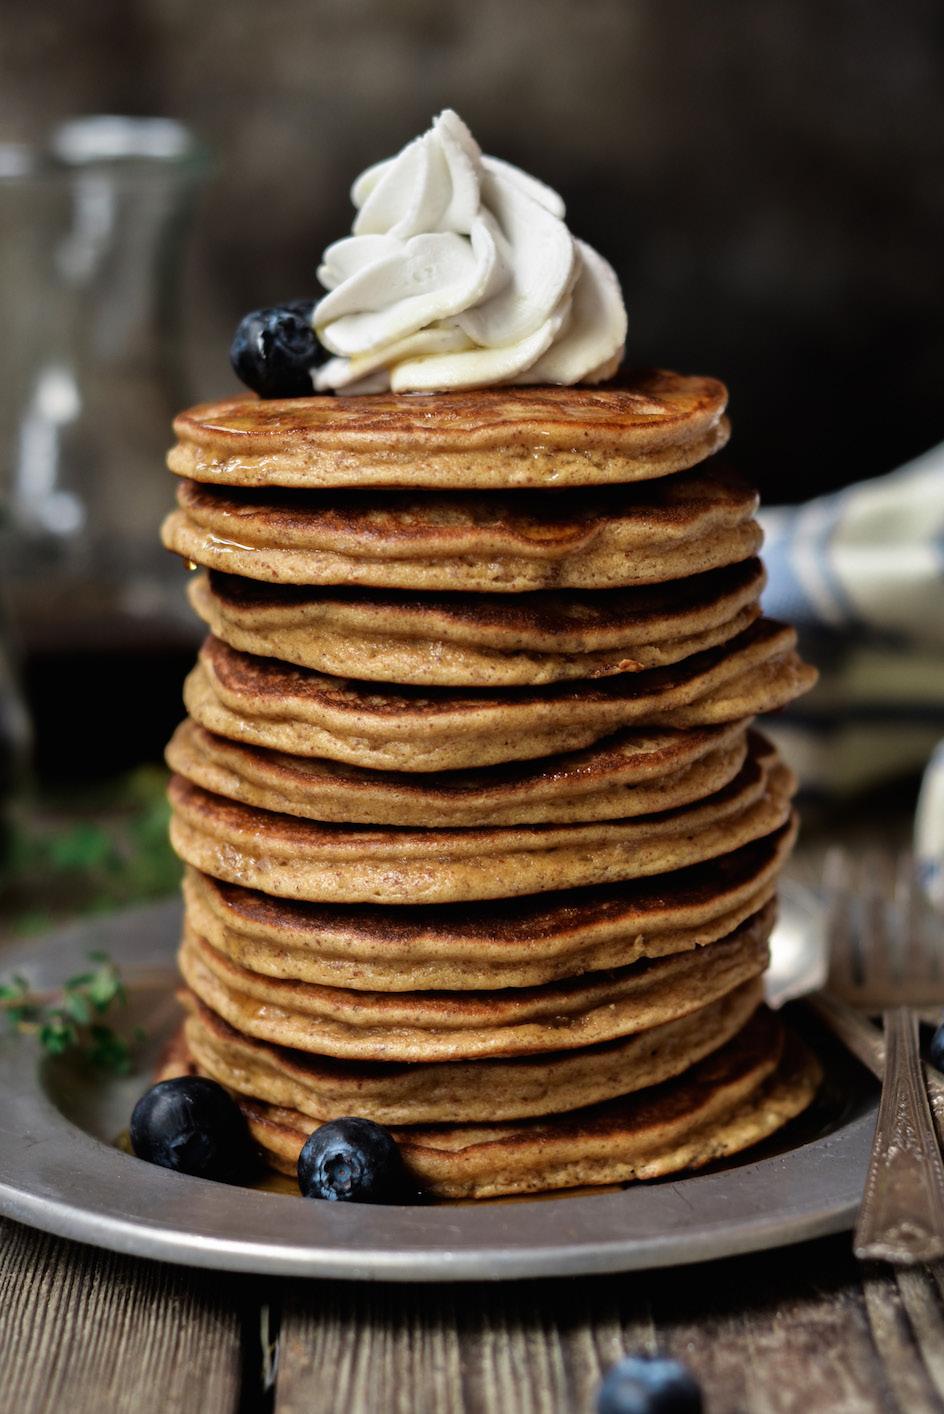 DREAMY FLUFFY Pancake Recipe Prep Time: 8 minutes Cook Time: 15 minutes Serves: 12-14 pancakes ½ cup packed dates ½ cup almond flour ½ cup almond butter ¼ cup palm oil shortening ¼ cup coconut milk 5